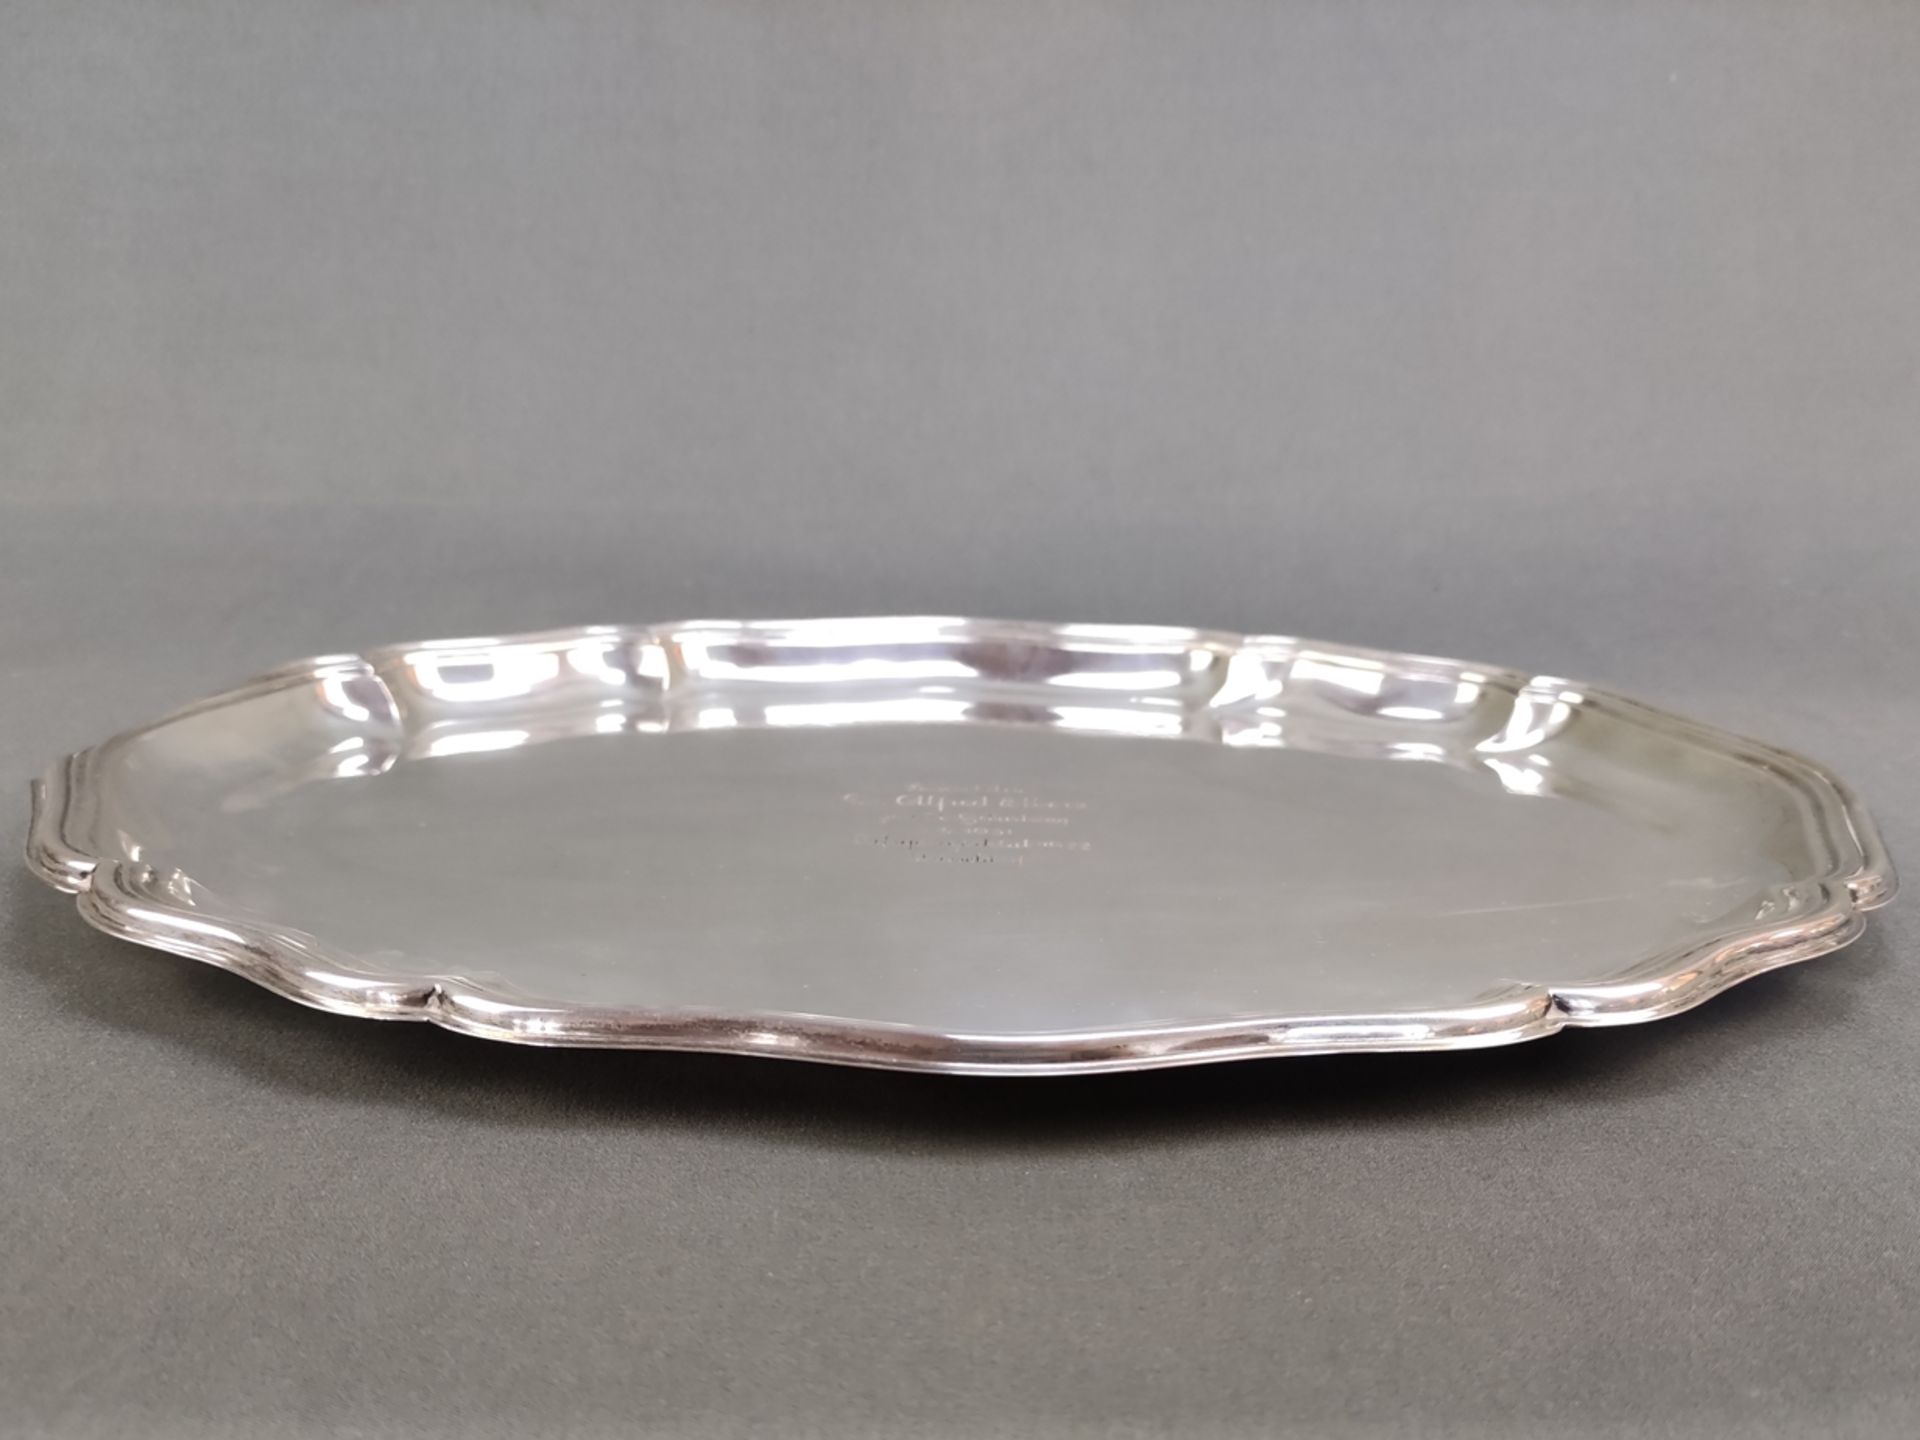 Oval tray, silver 830 (hallmarked), 500g, maker's mark "Wilkens", curved stepped rims, centre with